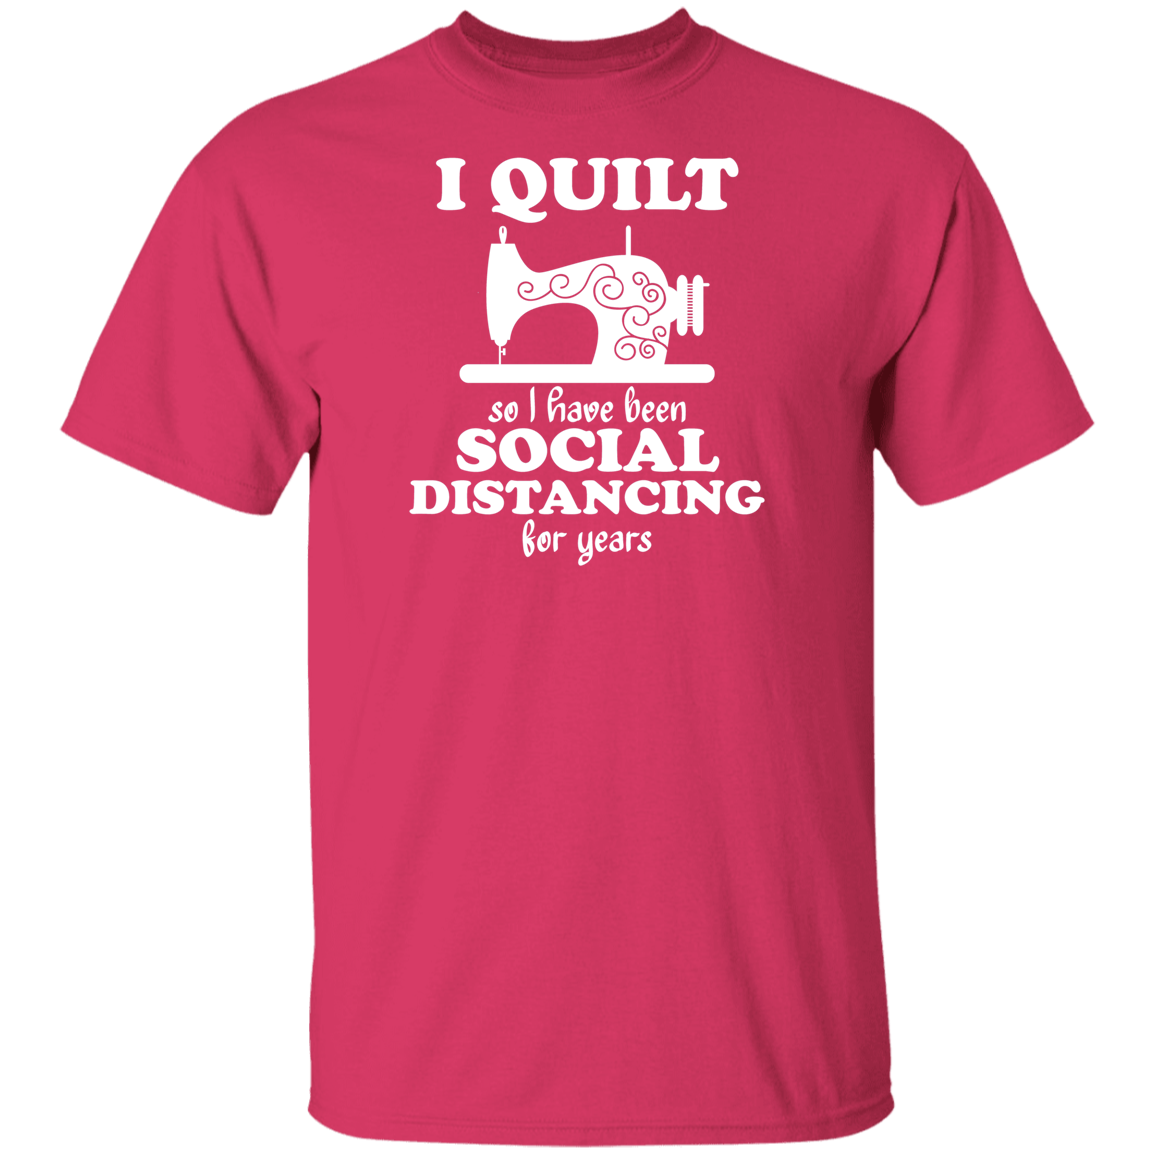 I Quilt so I have been Social Distancing T-Shirt